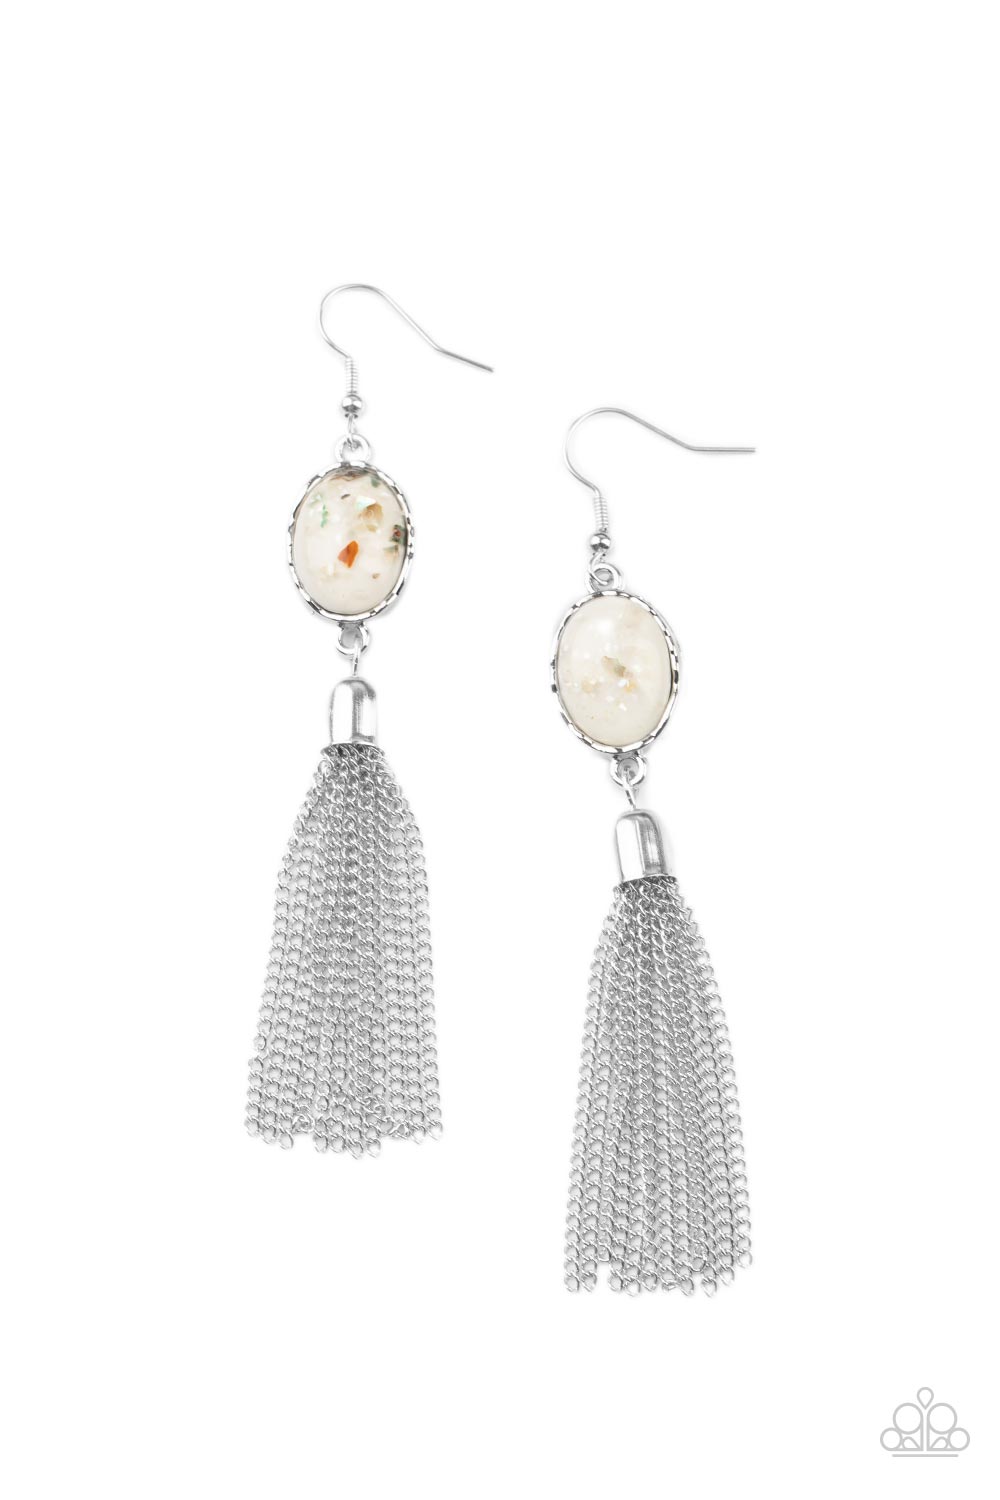 Paparazzi Accessories Oceanic Opalescence - White Earrings flecks of shells are encased in a glassy silver bead that is encased in a hammered silver frame. A silver chain tassel swings from the bottom of the iridescent frame, creating an ethereal display. Earring attaches to a standard fishhook fitting.  Sold as one pair of earrings.  Paparazzi Jewelry is lead and nickel free so it's perfect for sensitive skin too!